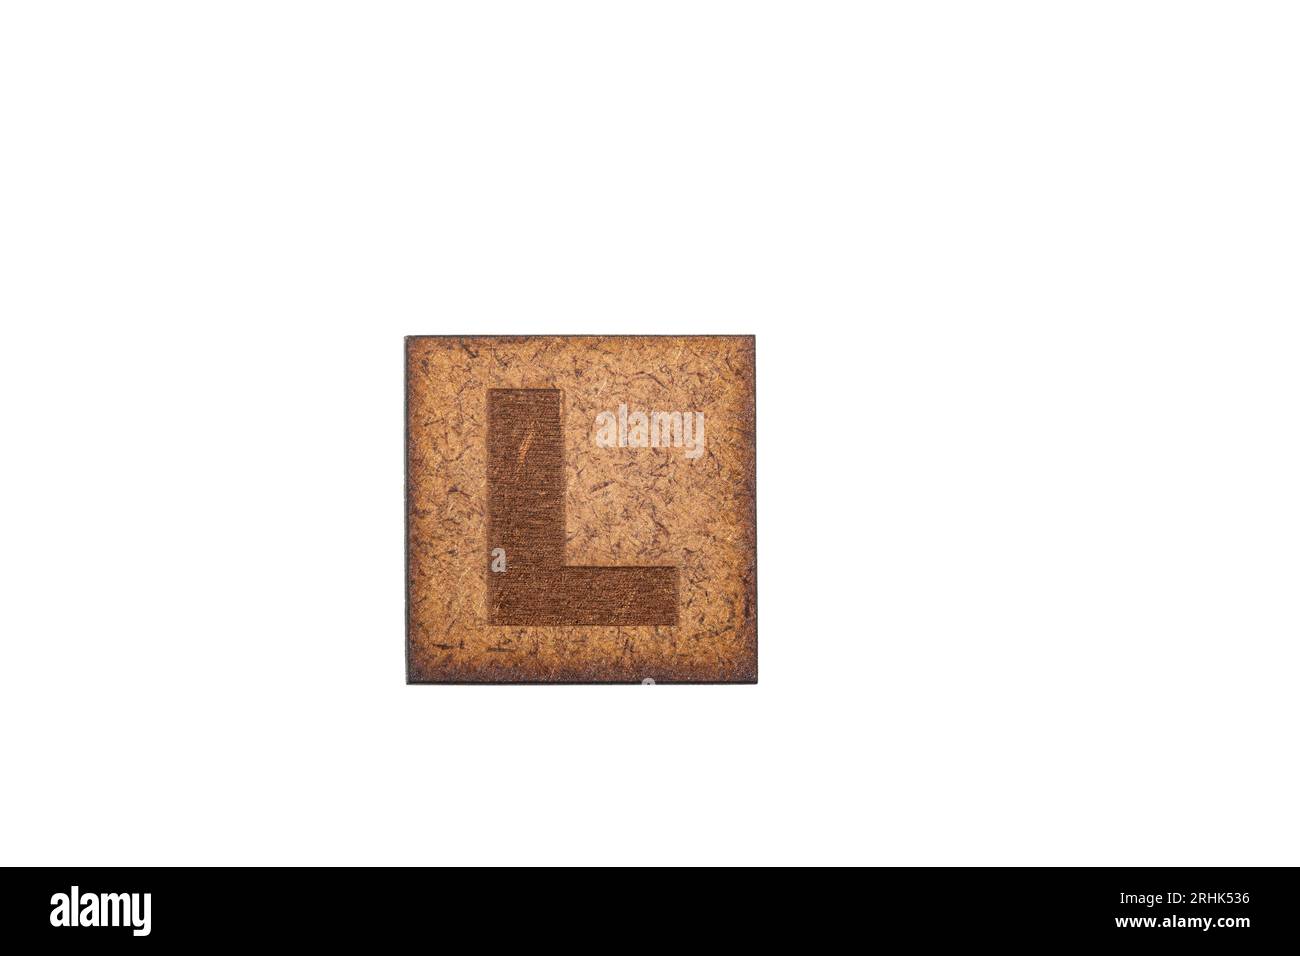 Capital Letter In Square Wooden Tiles - Letter L, On White Background. Stock Photo